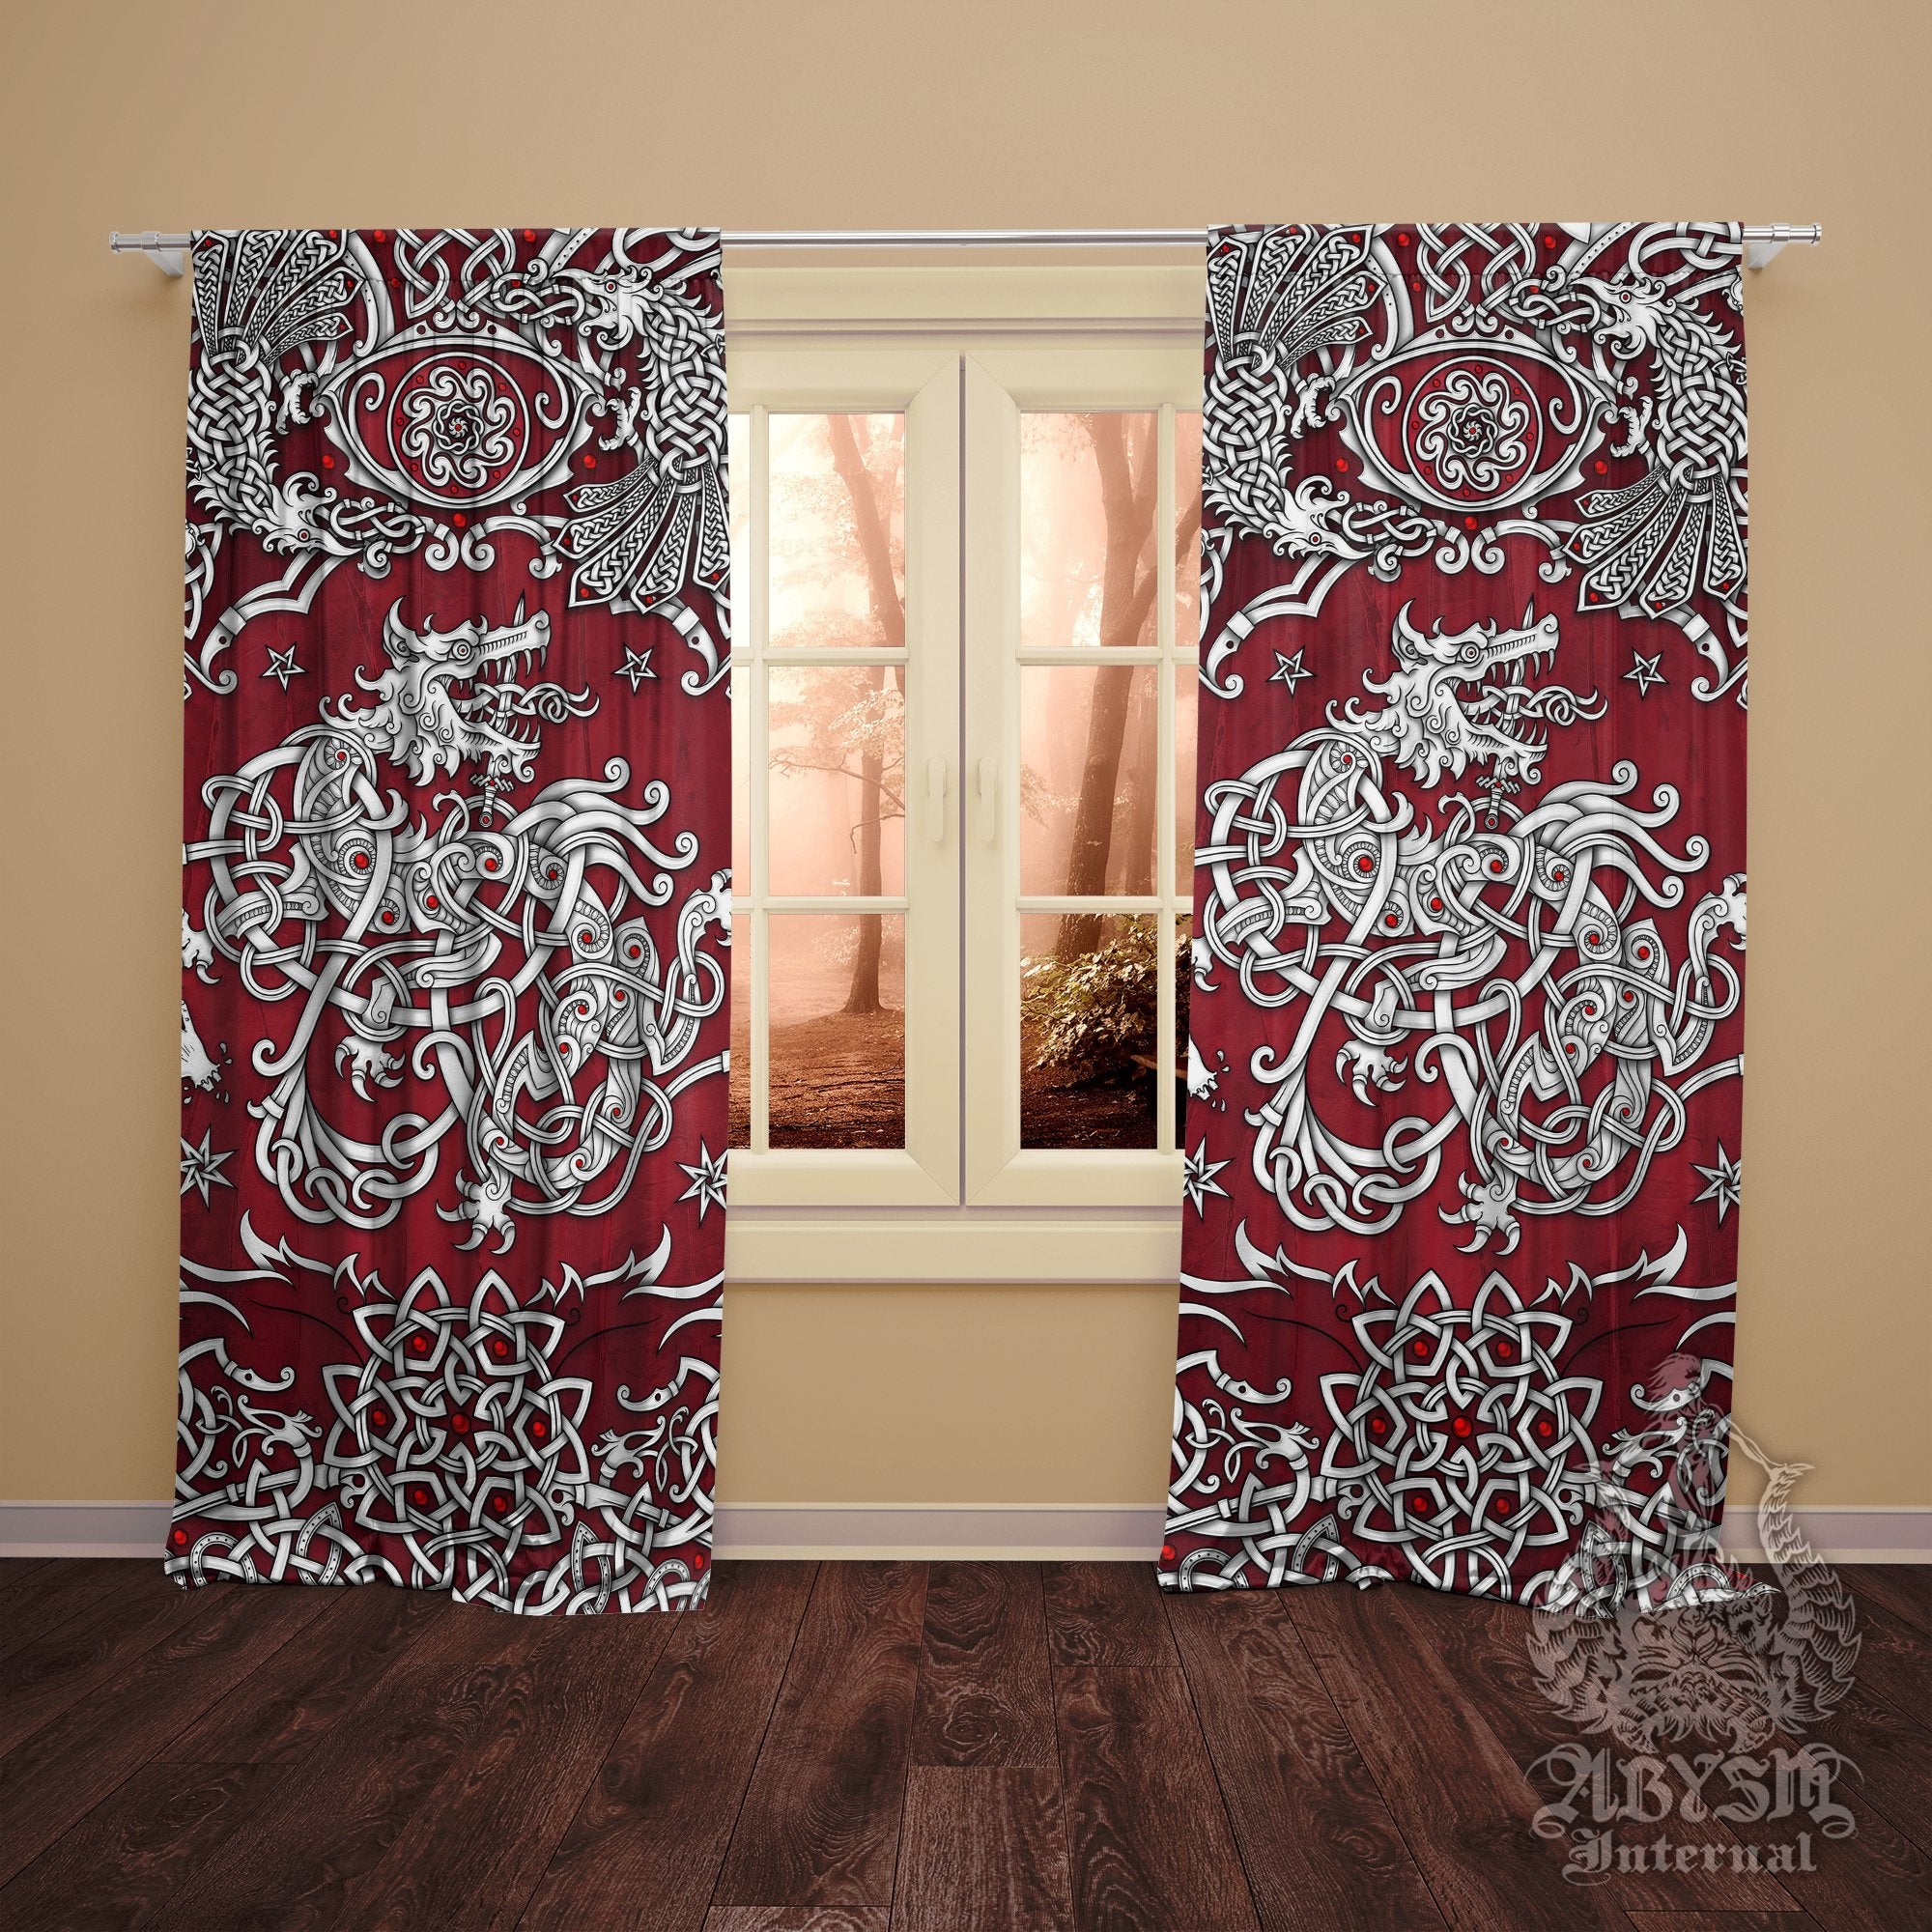 Fenrir Curtains, 50x84' Printed Window Panels, Old Norse Room Decor, Viking Wolf Art Print - White and 3 Colors - Abysm Internal